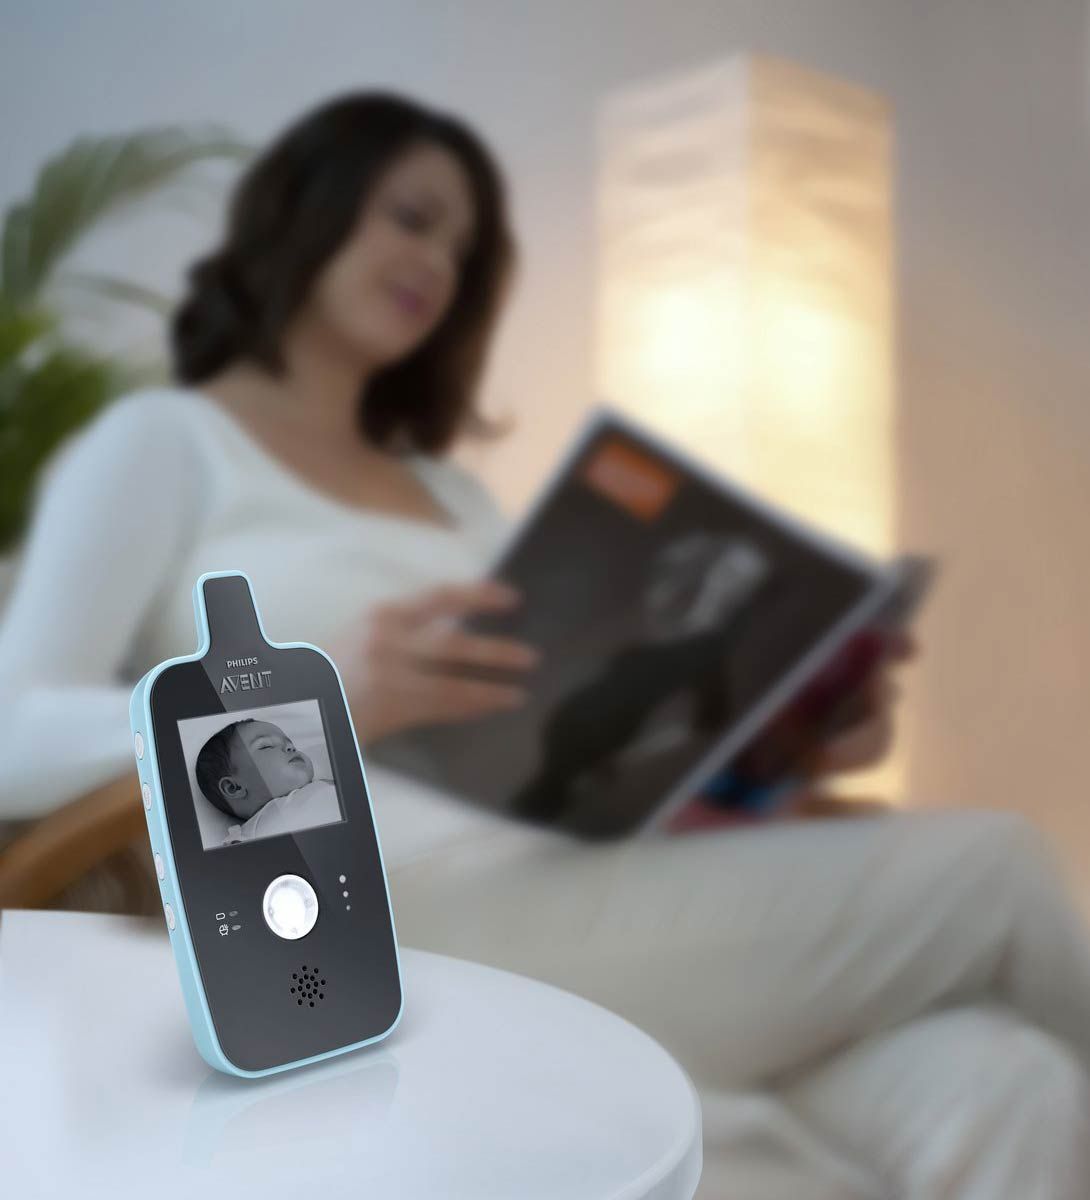 best baby monitor for iphone